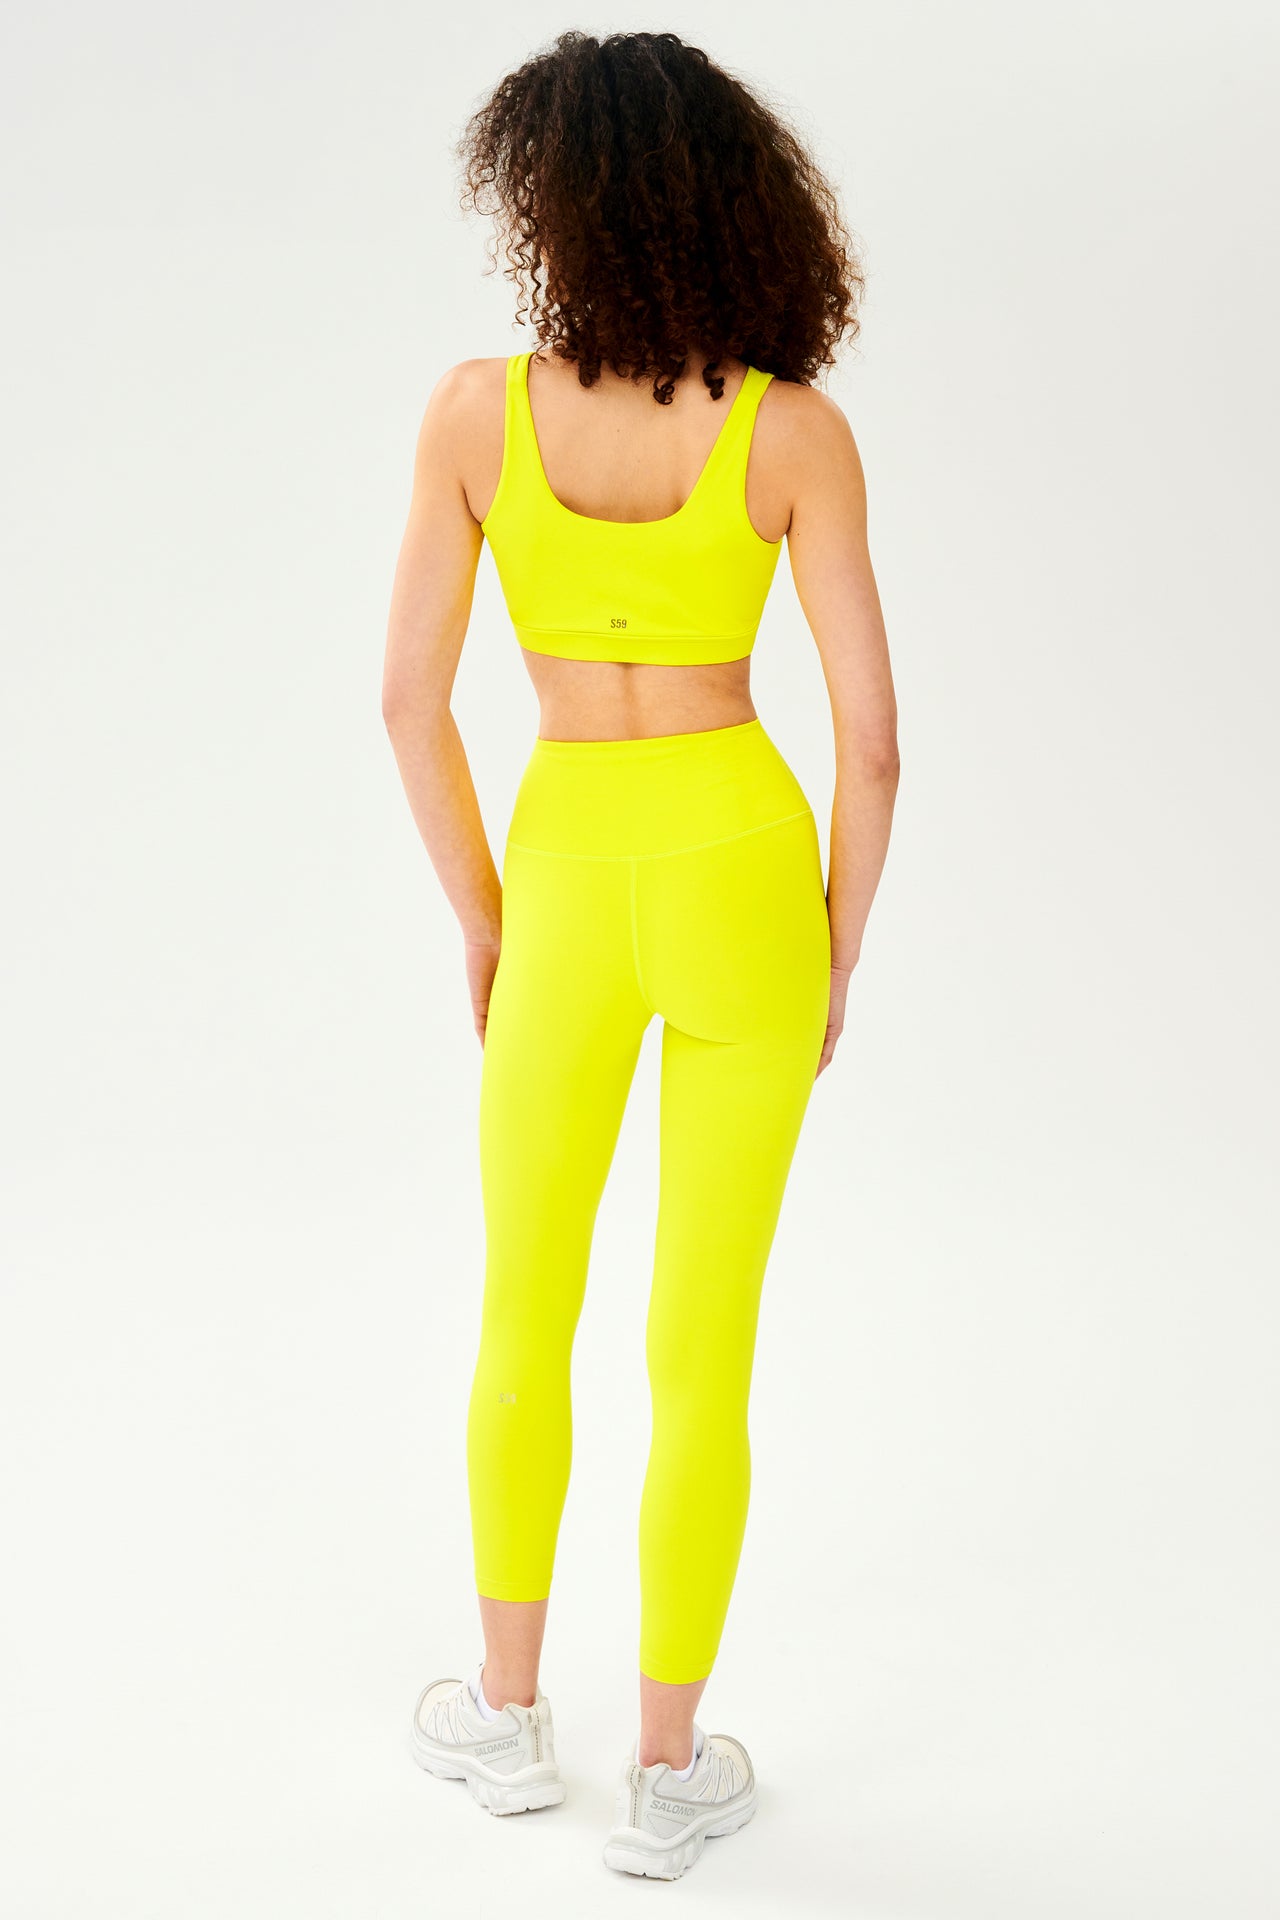 Back full view view of woman with curly dark wearing bright yellow bra with bright yellow high waist  leggings and white shoes